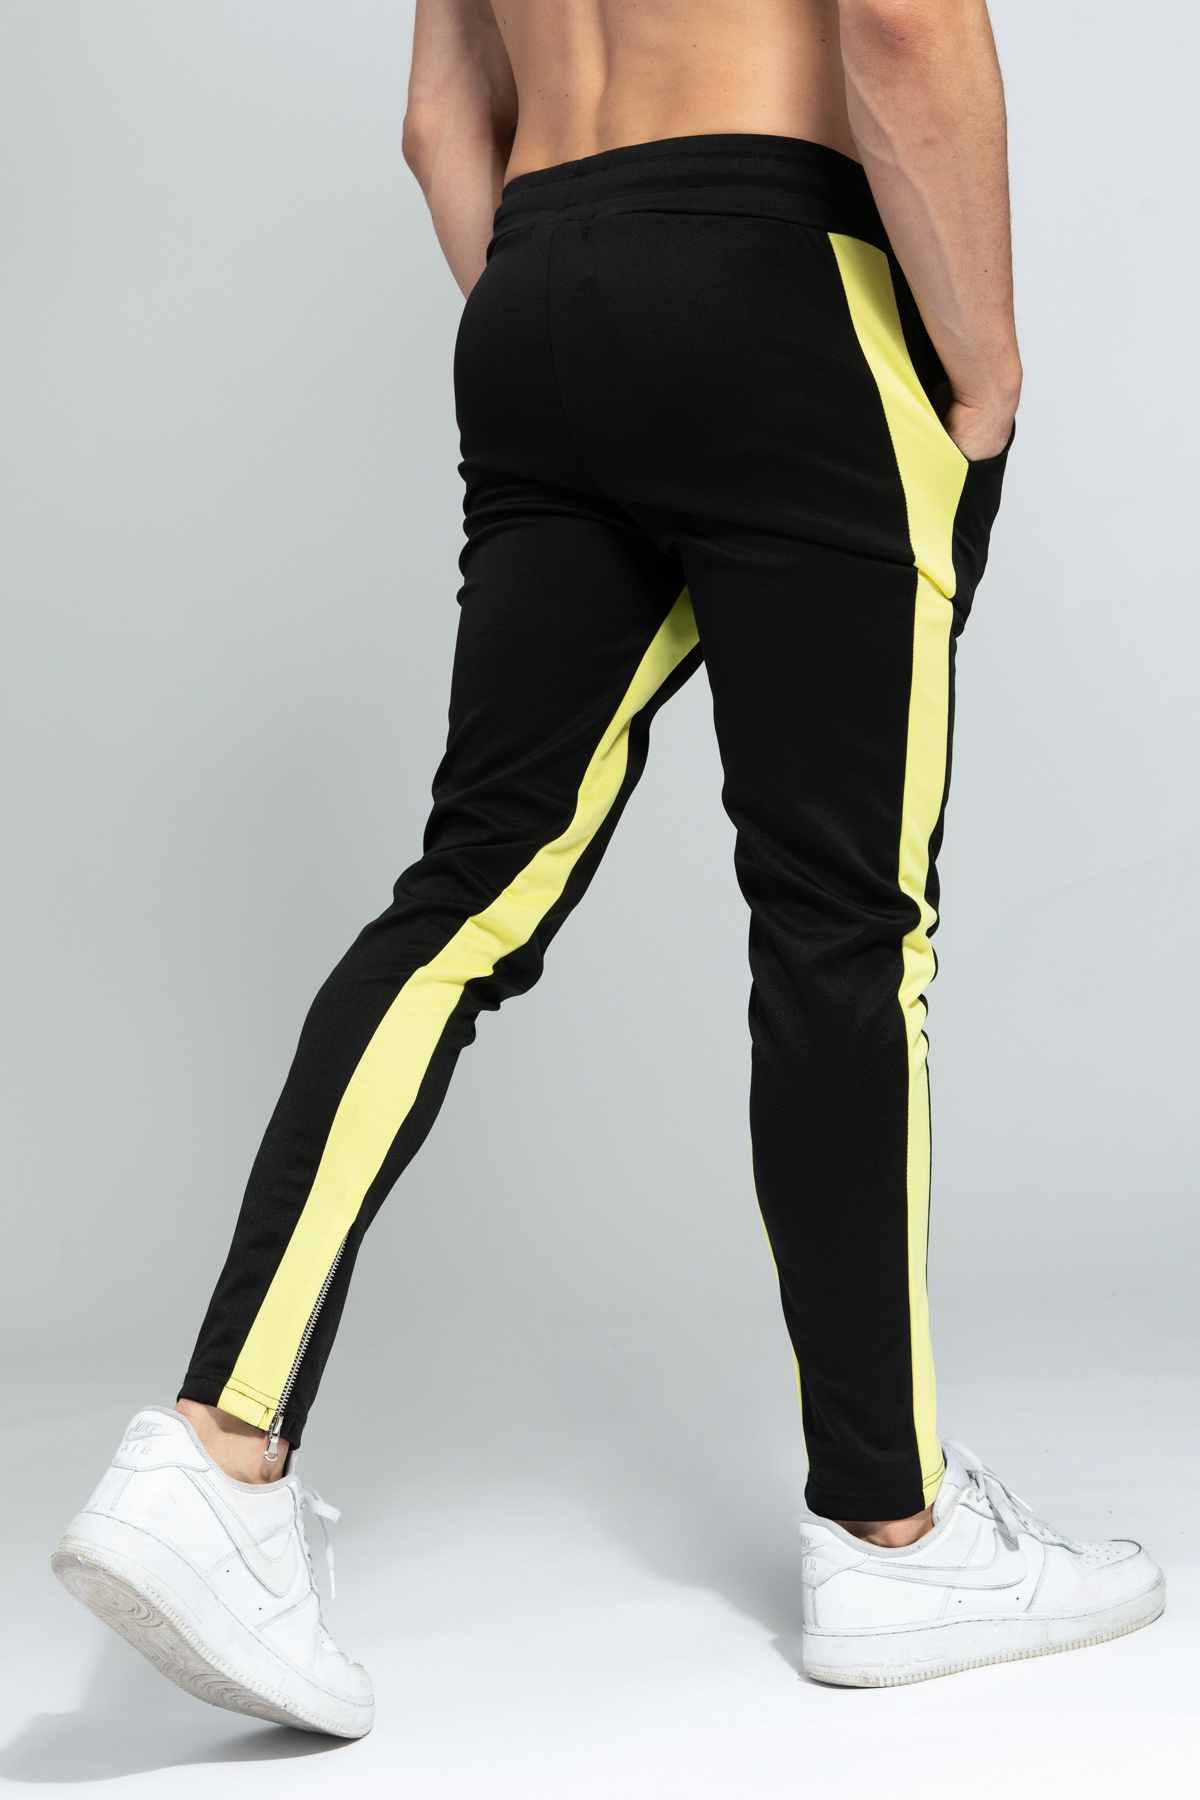 TAPED JOGGERS - BLACK/YELLOW